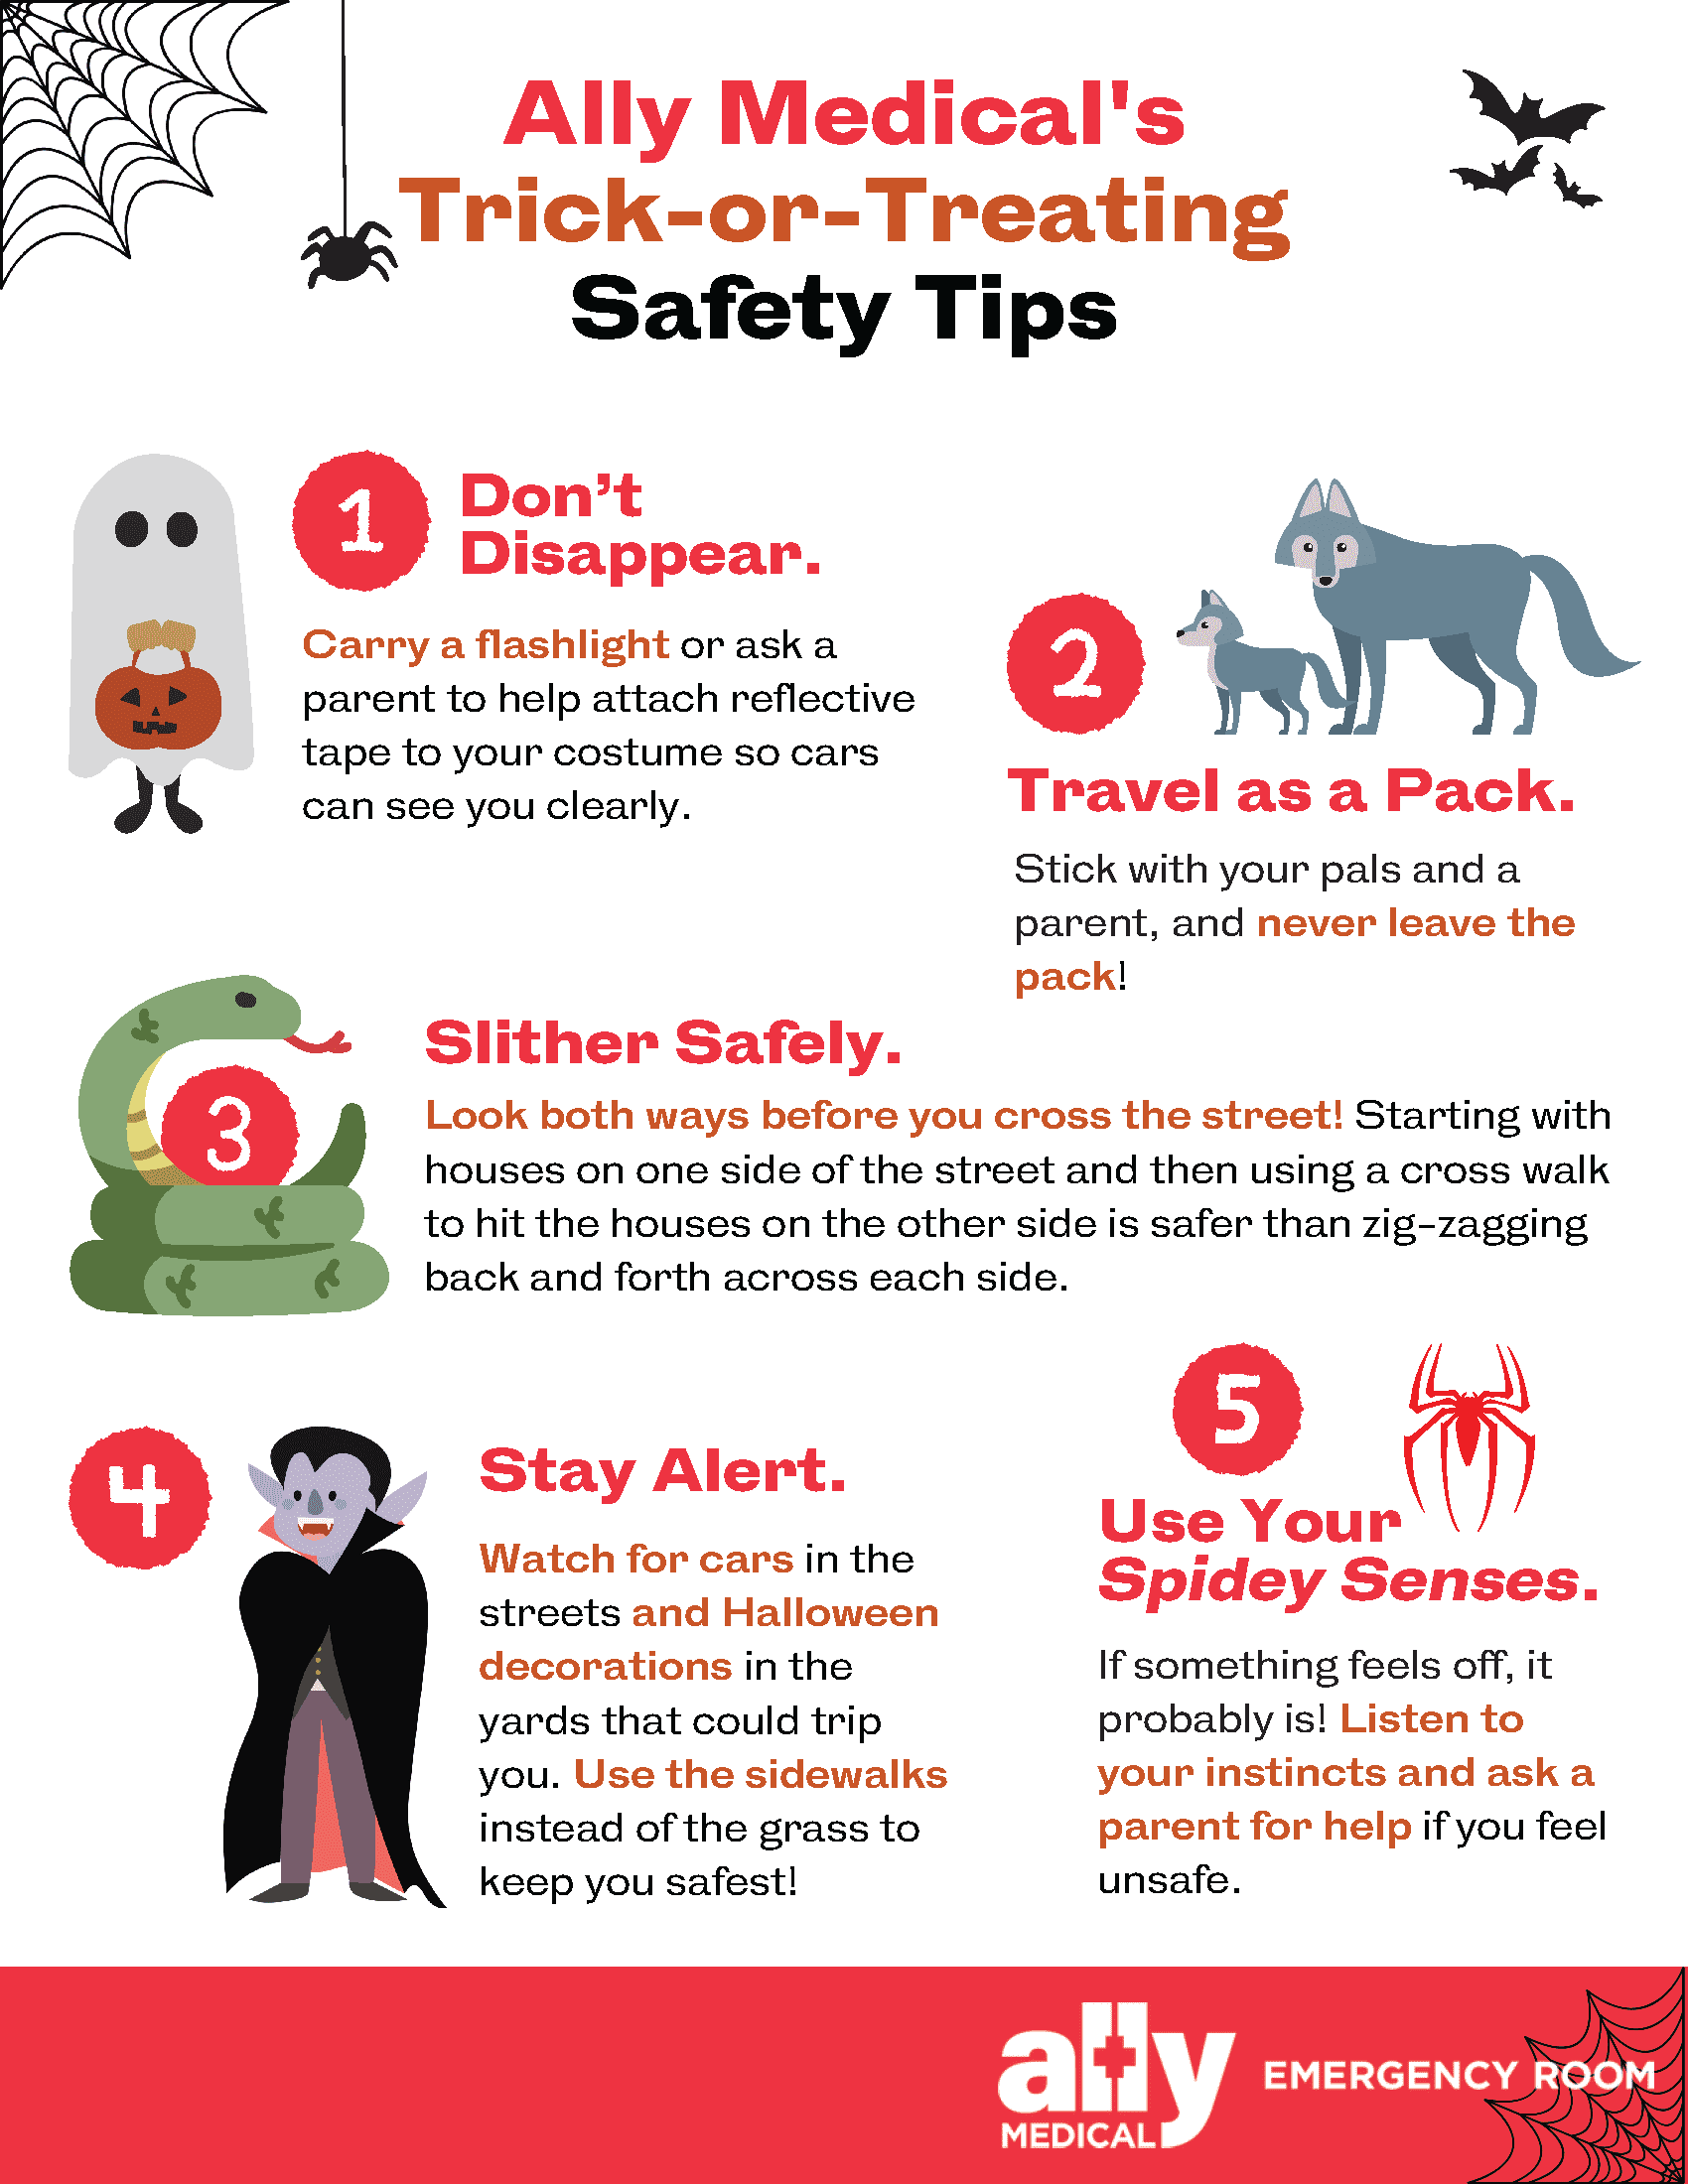 An infographic with a list of tips for safe trick-or-treating. Click the link to download a pdf with embedded text.